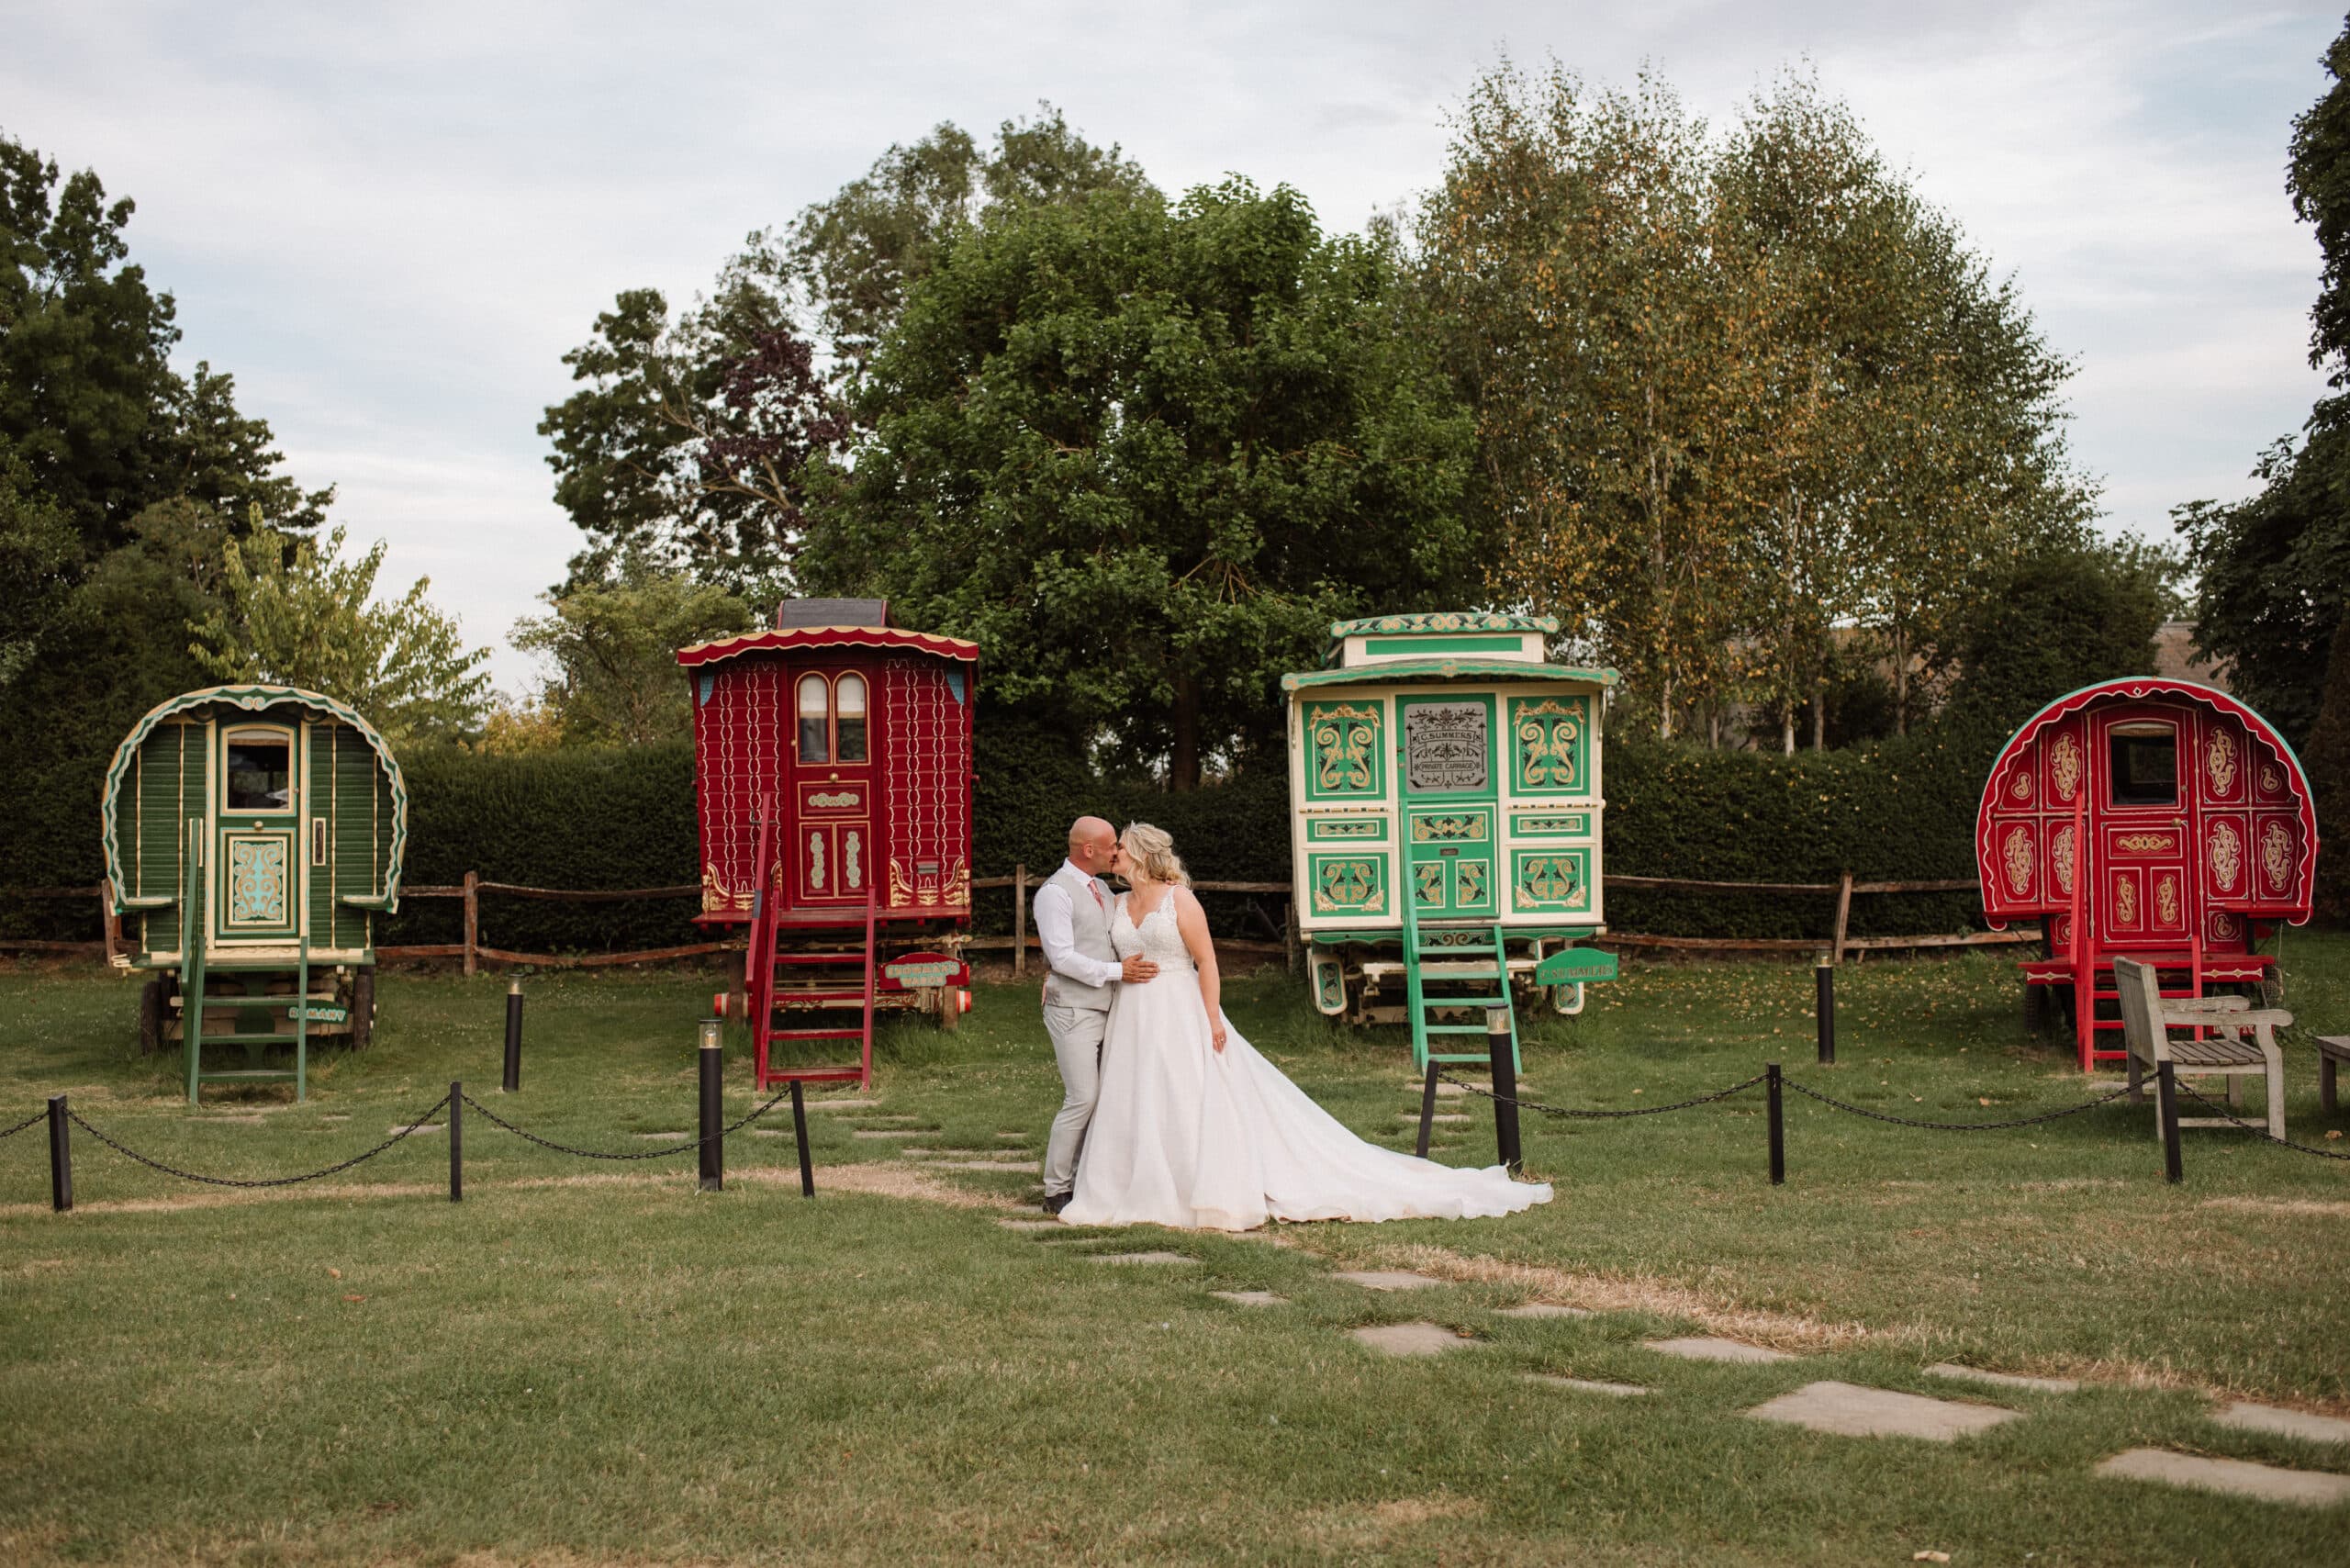 Bride and Groom in front of colourful red and green romany wagons at boho wedding venue